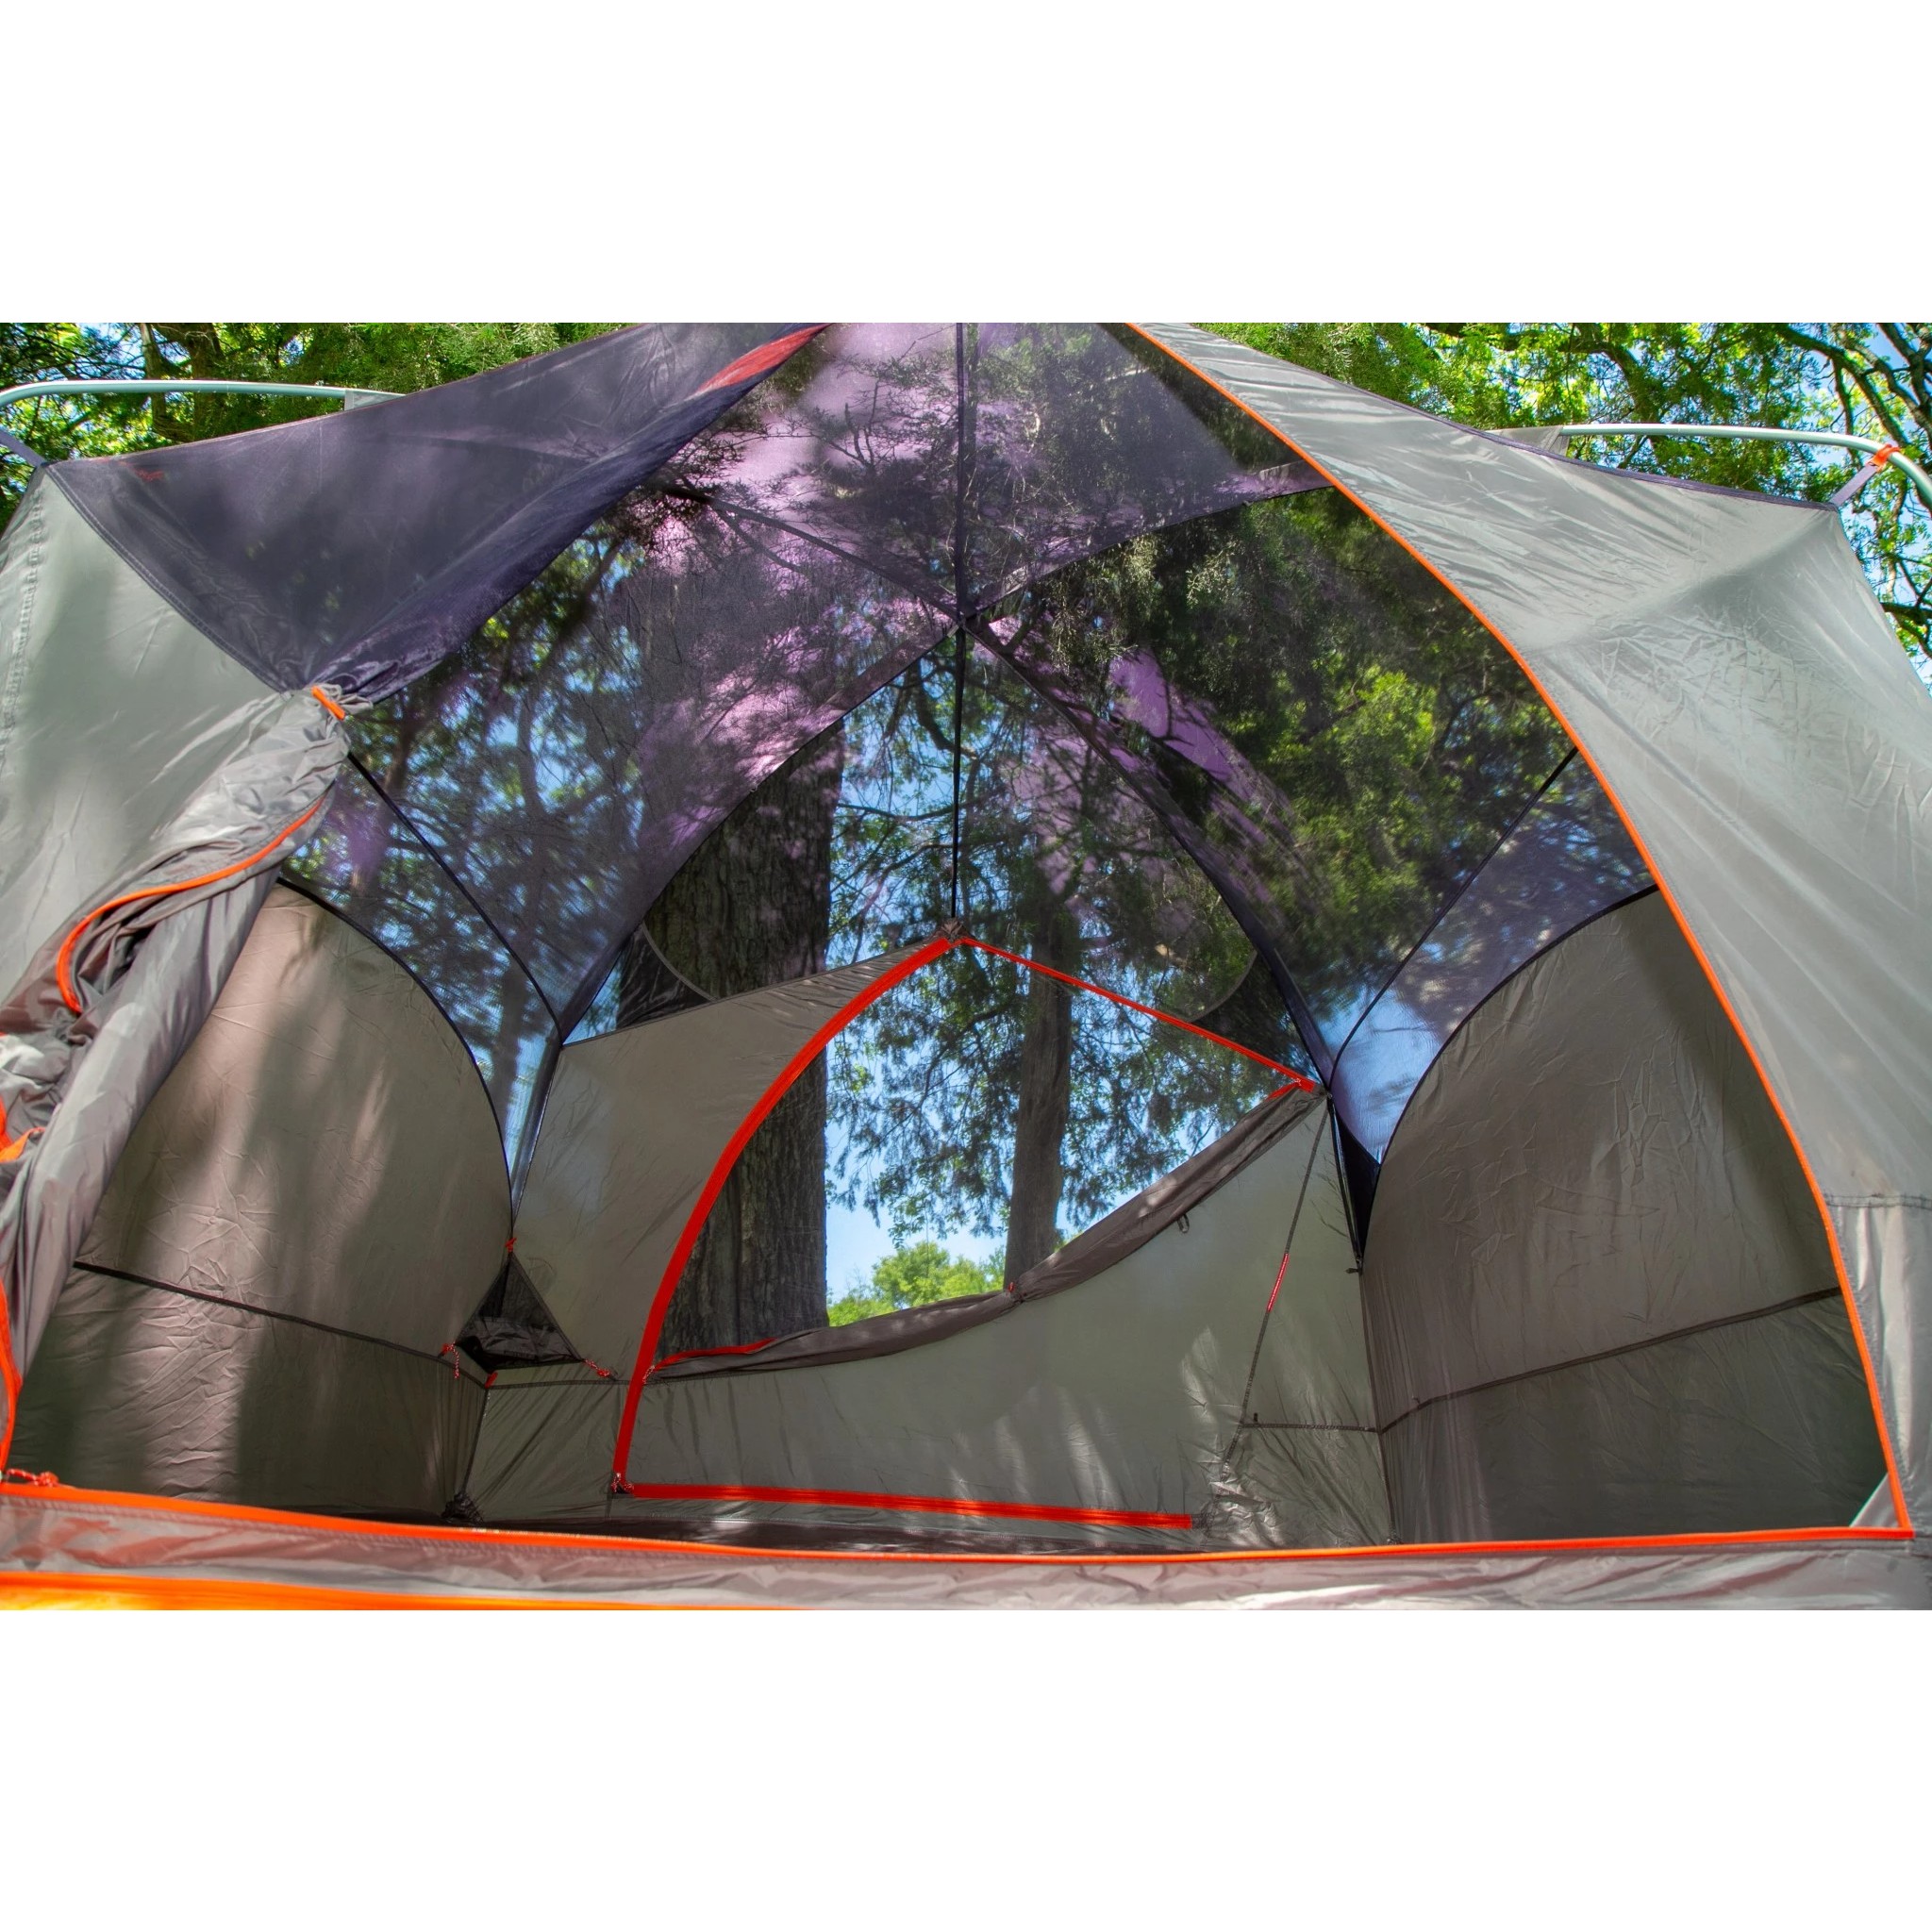 Big Agnes Bunk House 4 Family Backpacking Tent